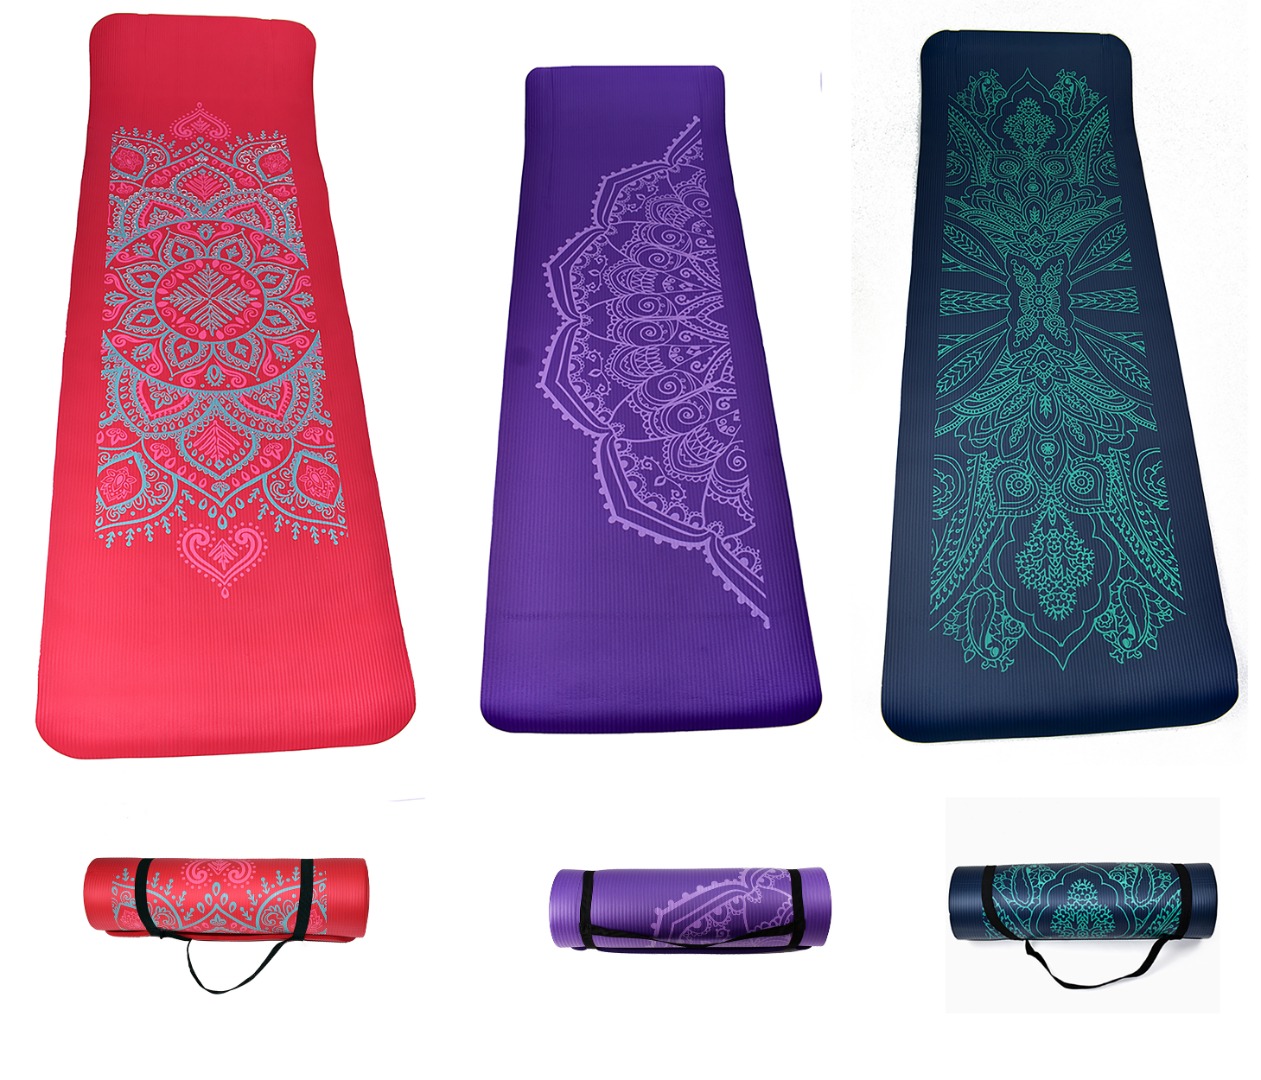 thick exercise mat uk